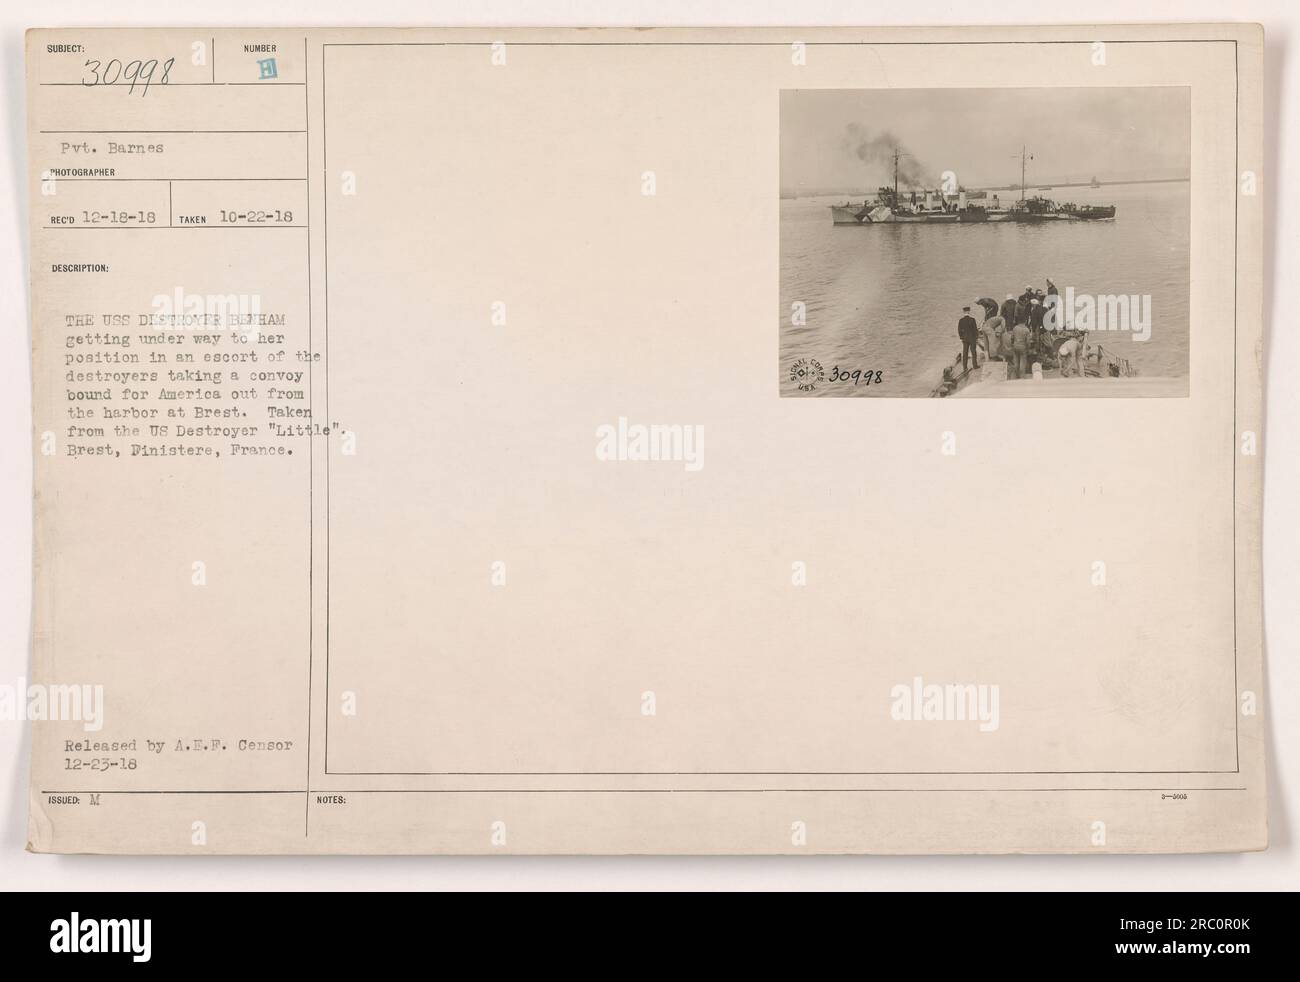 Caption: 'Private Barnes captured this photograph of the USS Destroyer Benham leaving Brest harbor in France. The ship was part of a convoy escorting ships bound for America during World War I. The image was taken from the US Destroyer 'Little' and released by the A.E.F. Censor on December 25, 1918.' Stock Photo